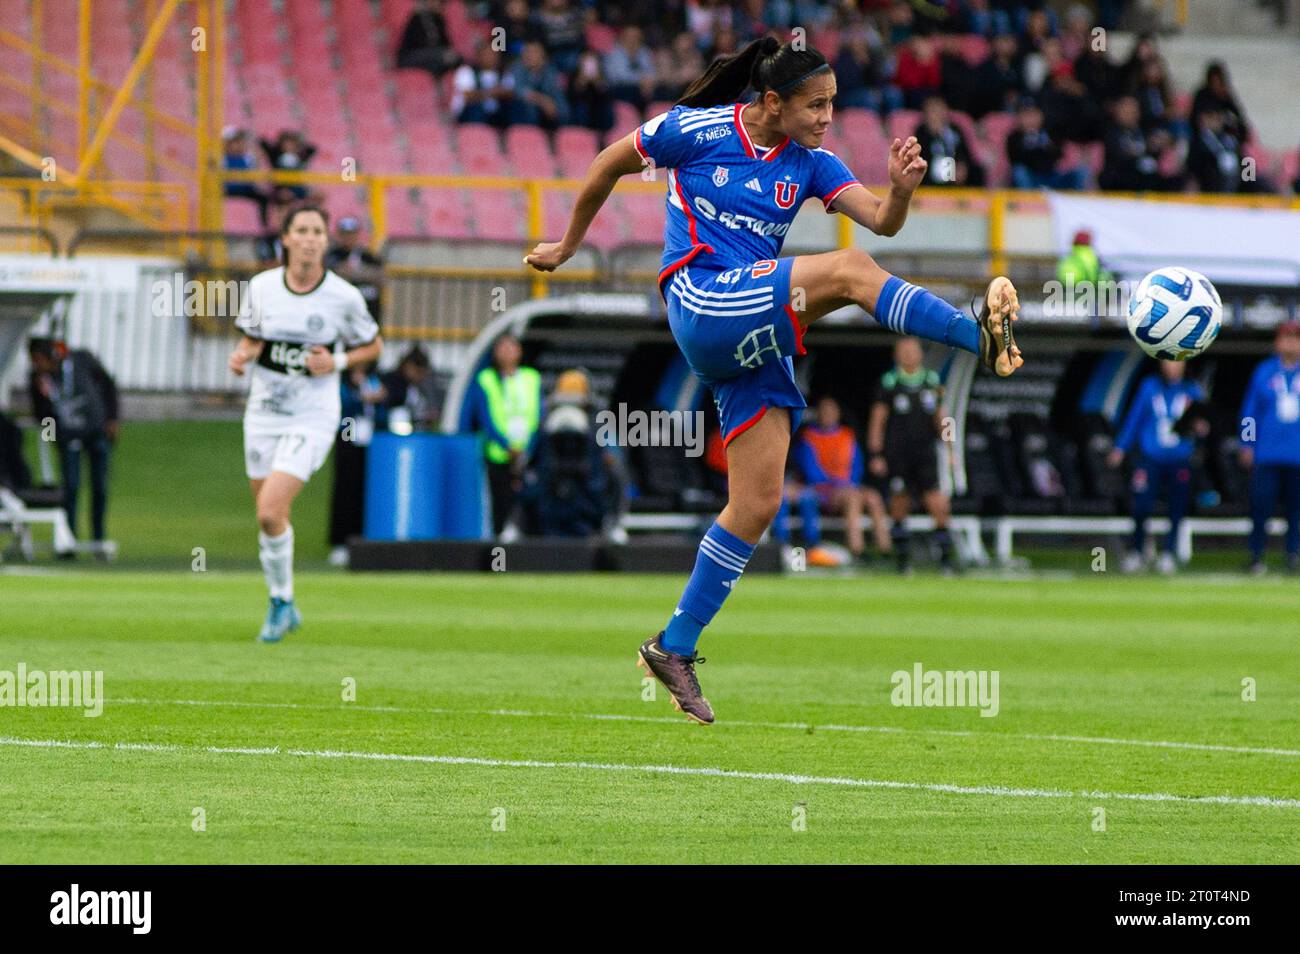 Bogota, Colombia. 08th Oct, 2023. Club Universidad de Chile's Mariana Morales during the group phase match between Paraguay's Club Olimpia (1) and Club Universidad de Chile (2) during the Copa Libertadores Femenina, in Bogota, Colombia, October 8, 2023. Photo by: Chepa Beltran/Long Visual Press Credit: Long Visual Press/Alamy Live News Stock Photo